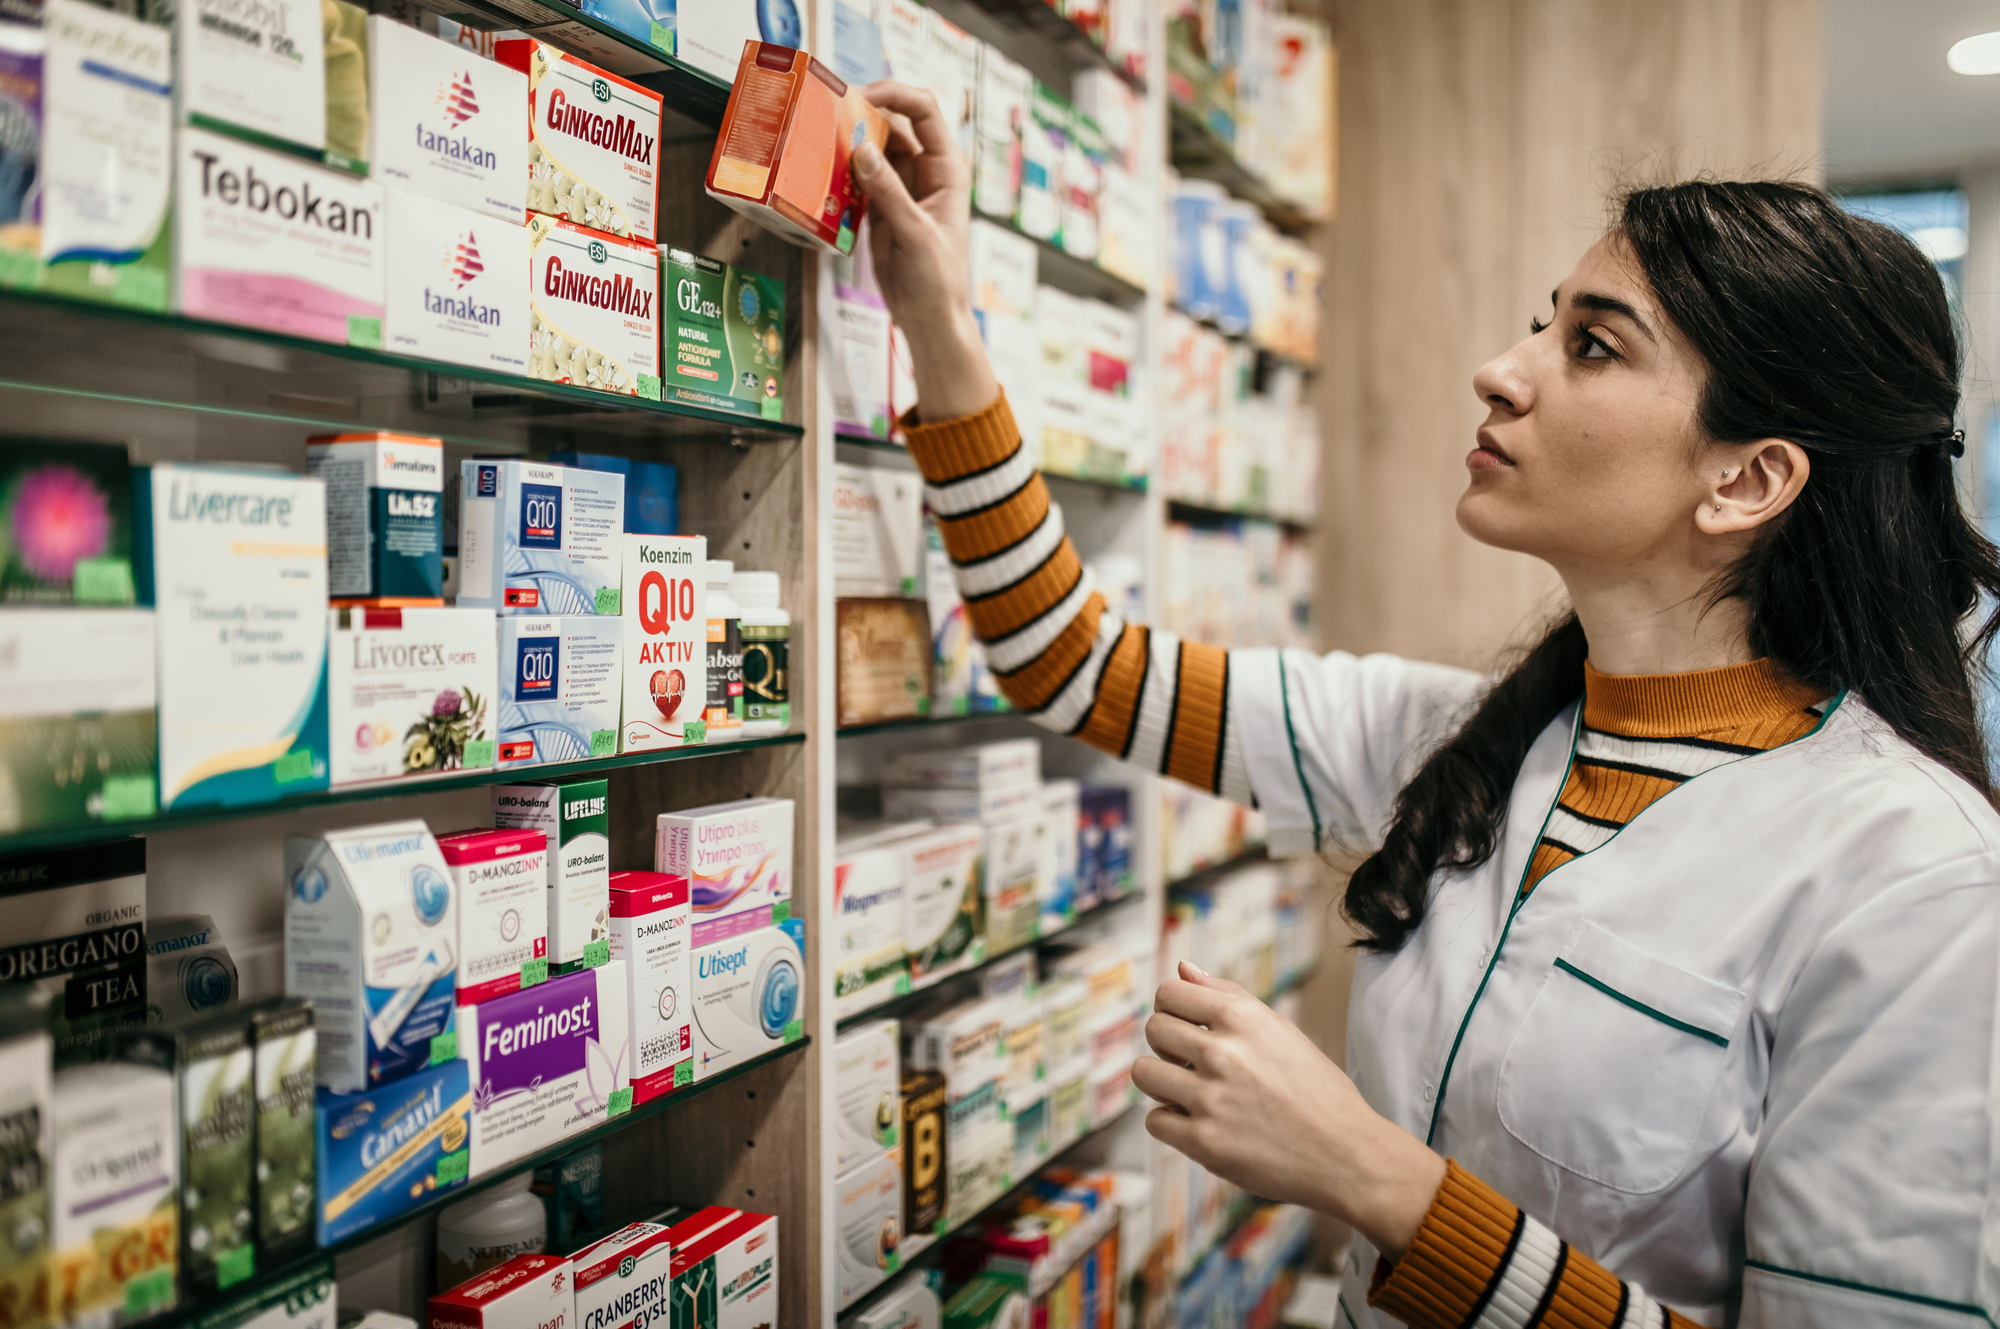 A woman shops in the vitamin aisle of a store.